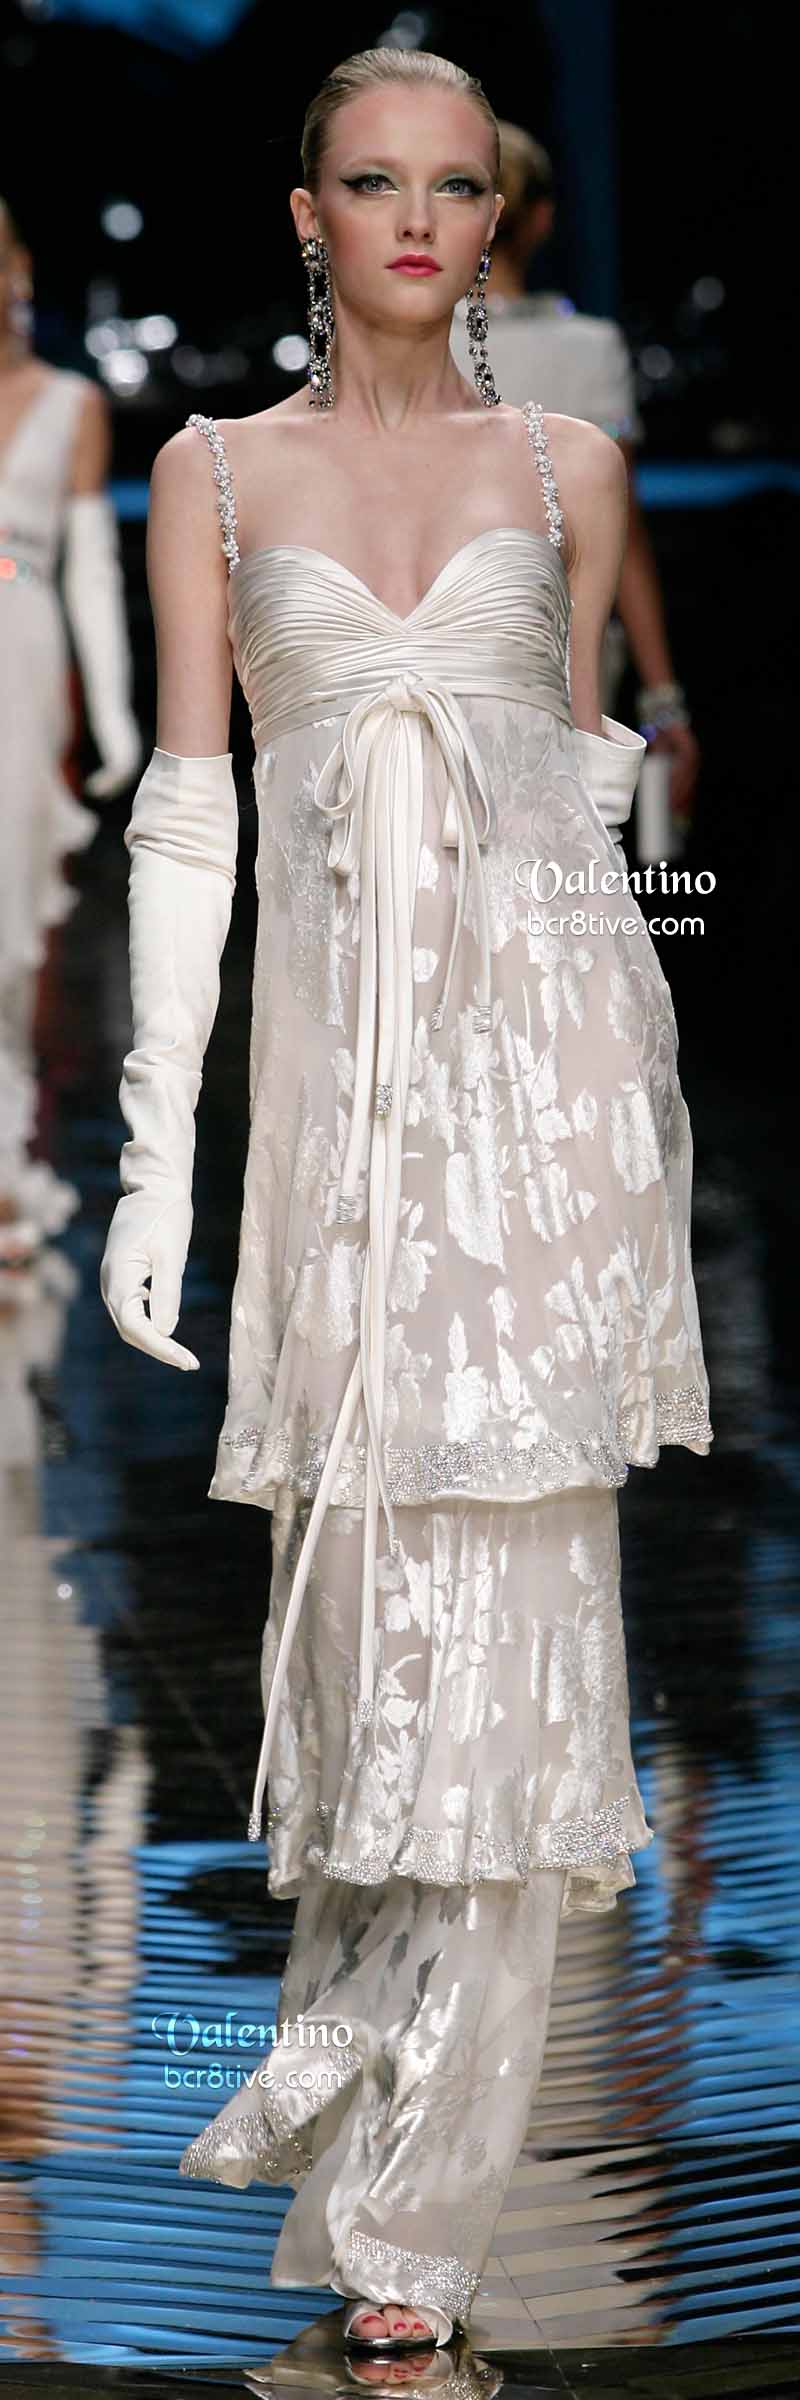 Farewell Valentino Collection – Page 5 – Be Creative